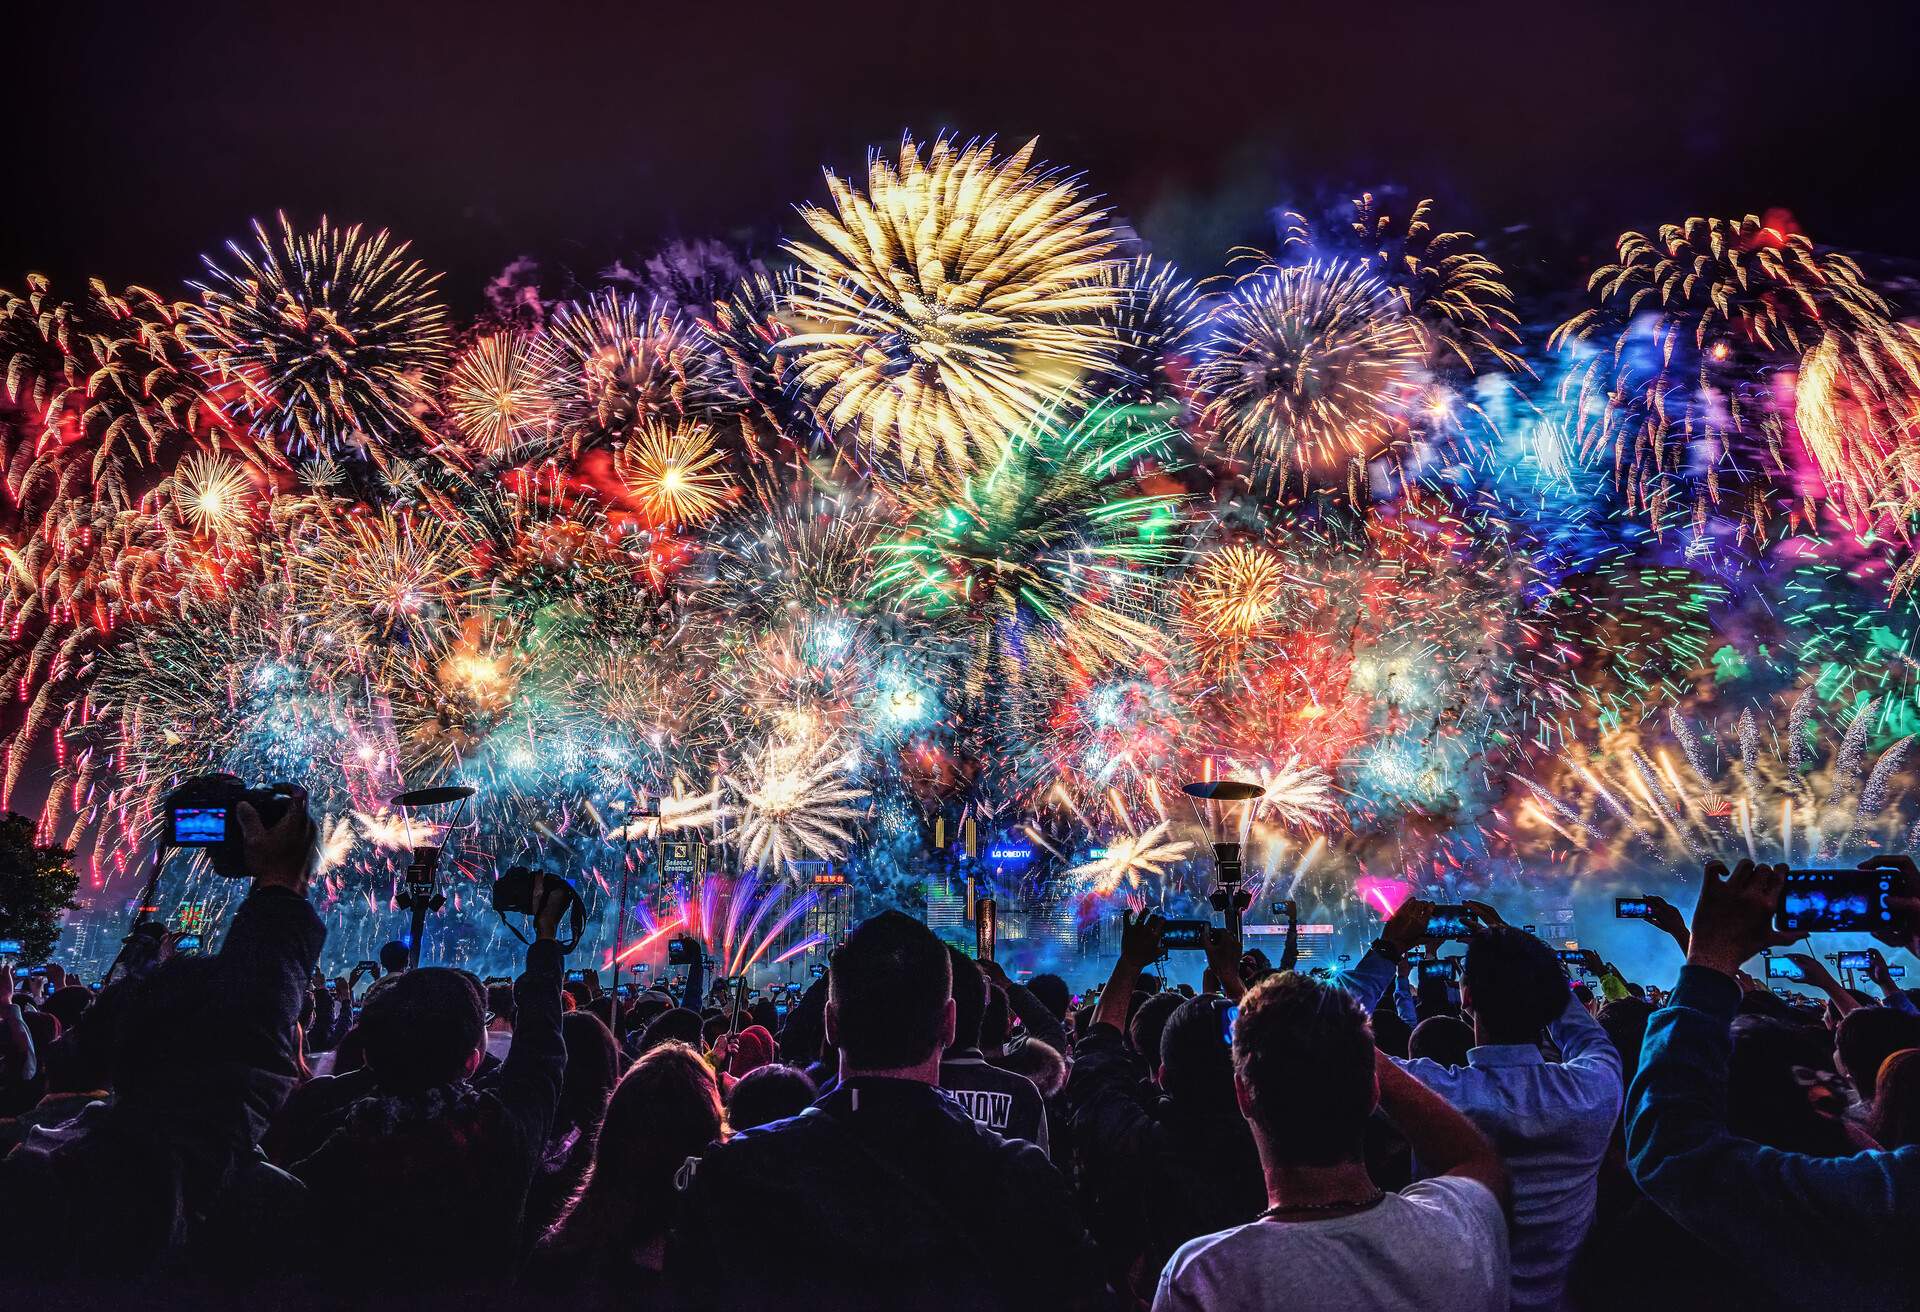 New years eve celebrations with bright fireworks in the sky in Hong Kong